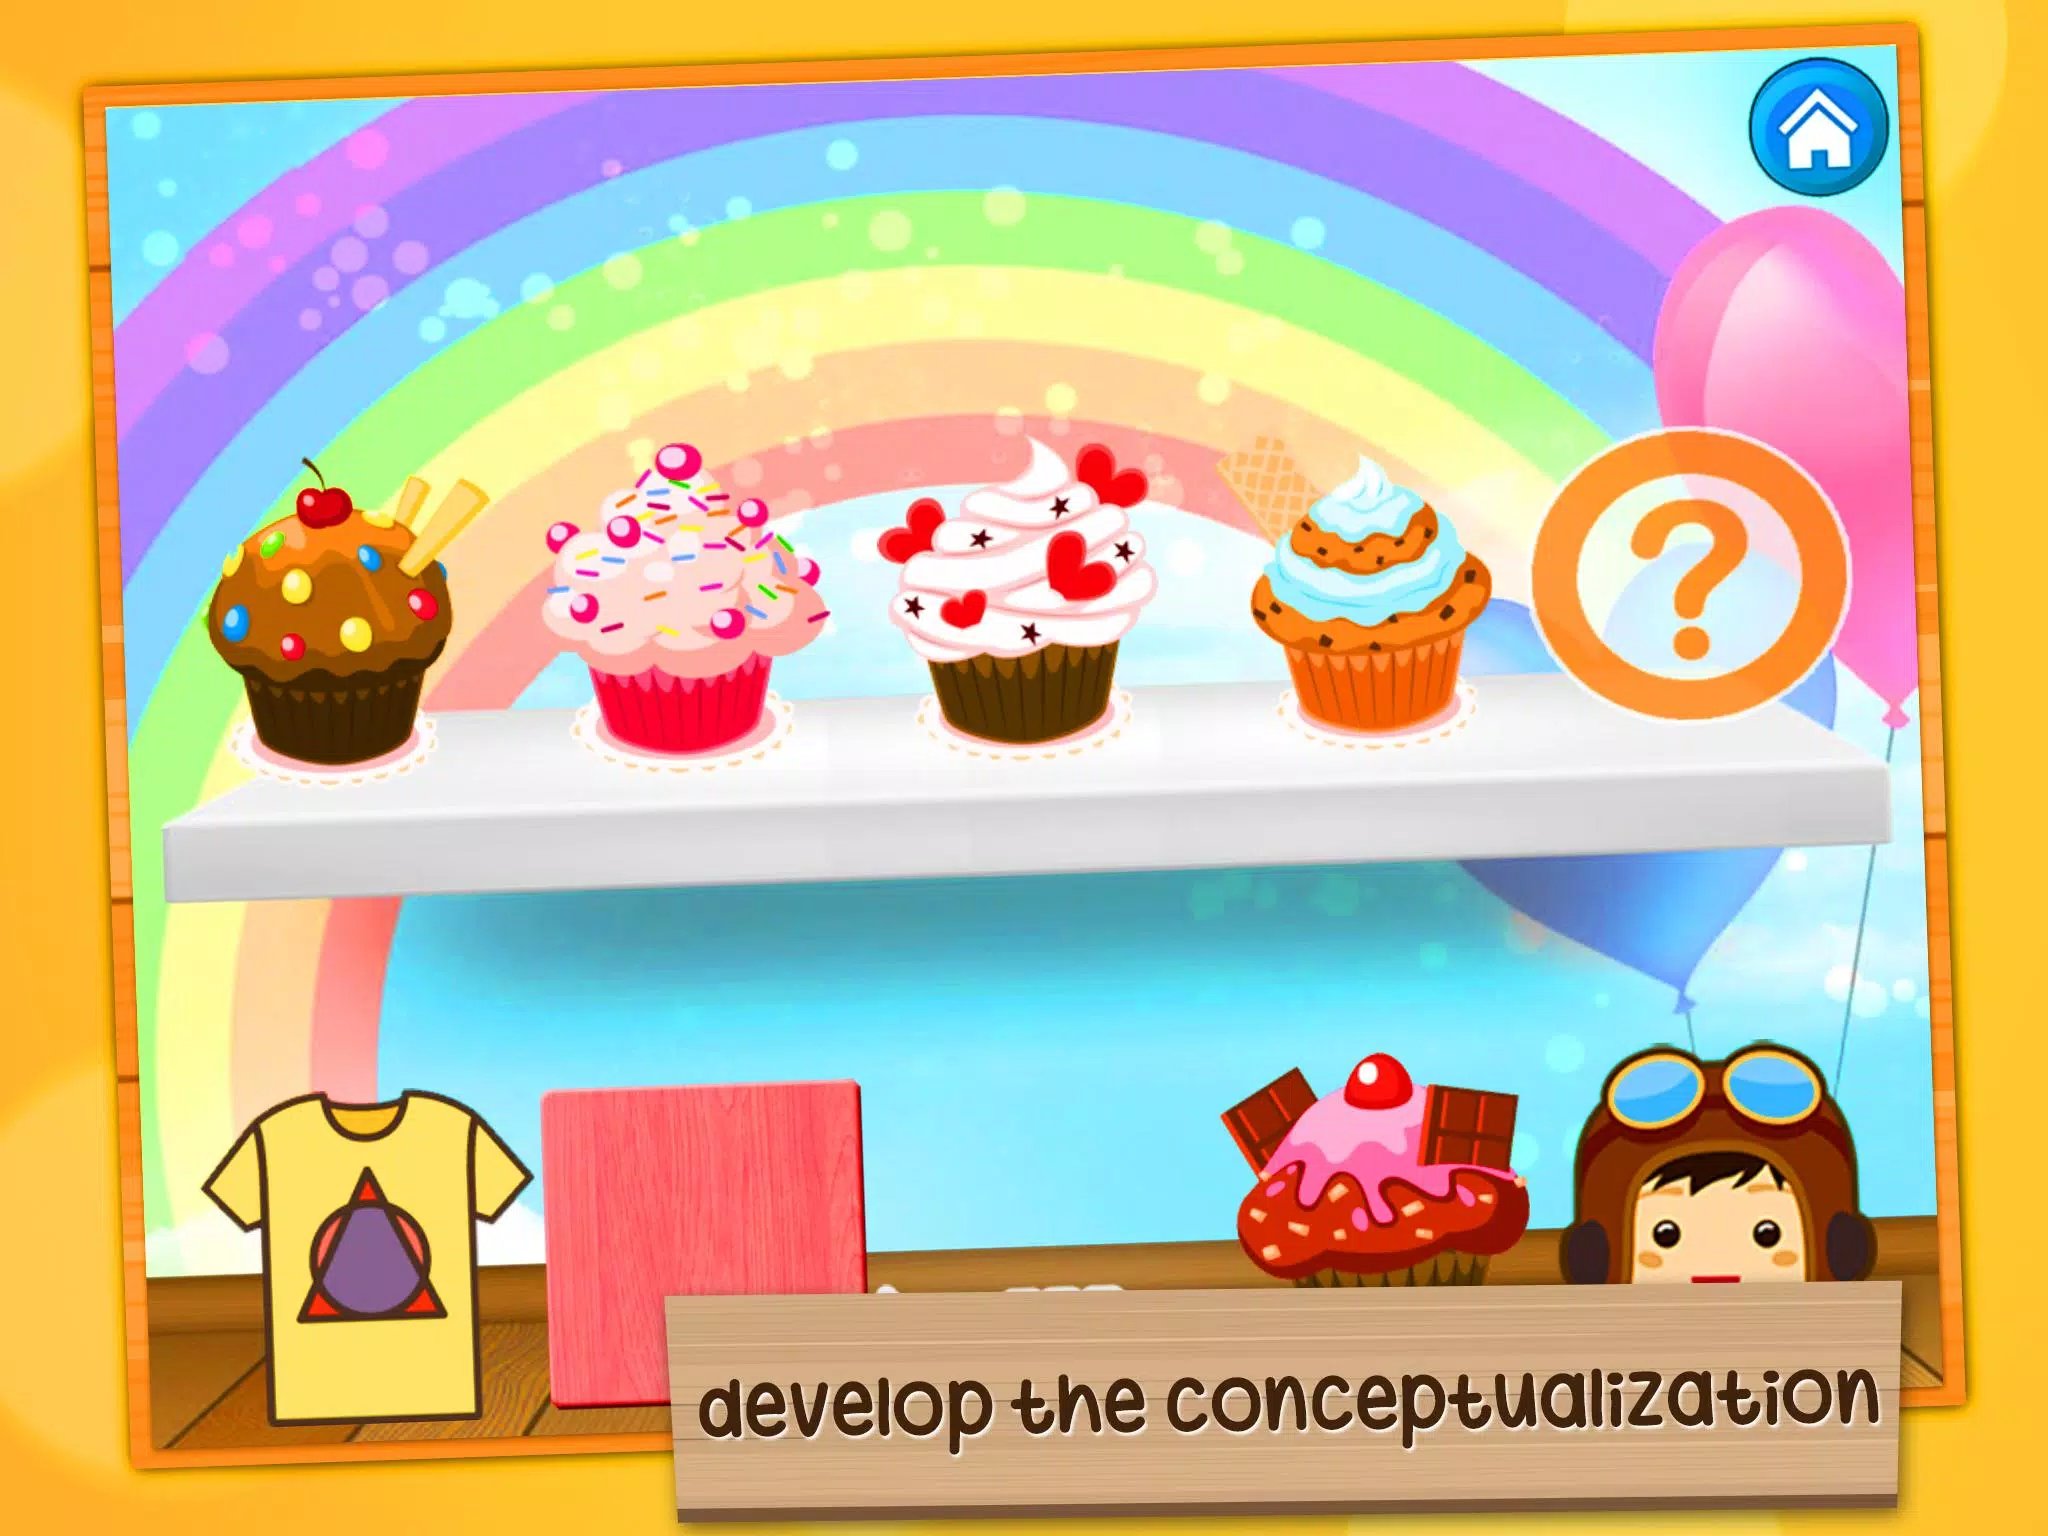 Download Baby games for toddlers for android 4.0.4